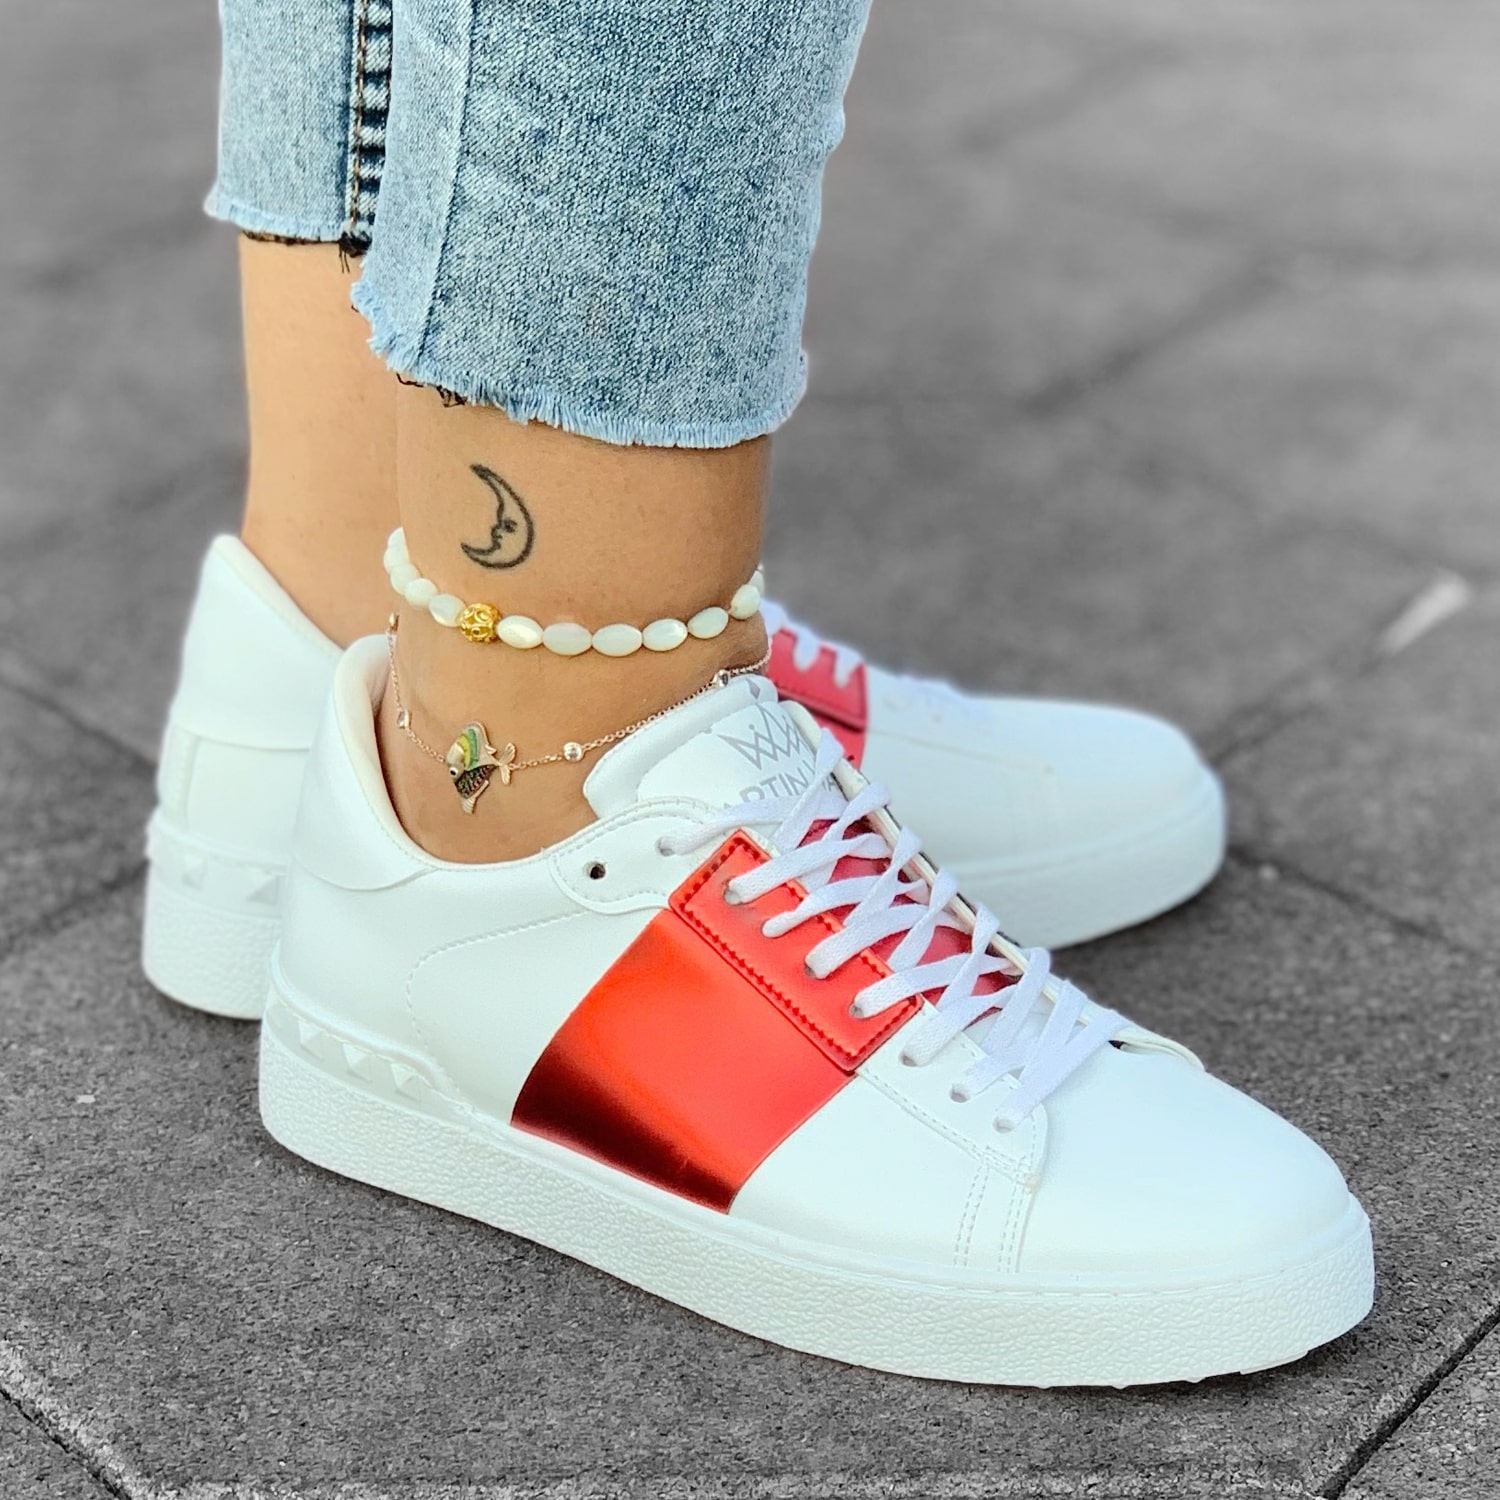 Martin Valen Women's Red Striped Lace-up Sneakers White